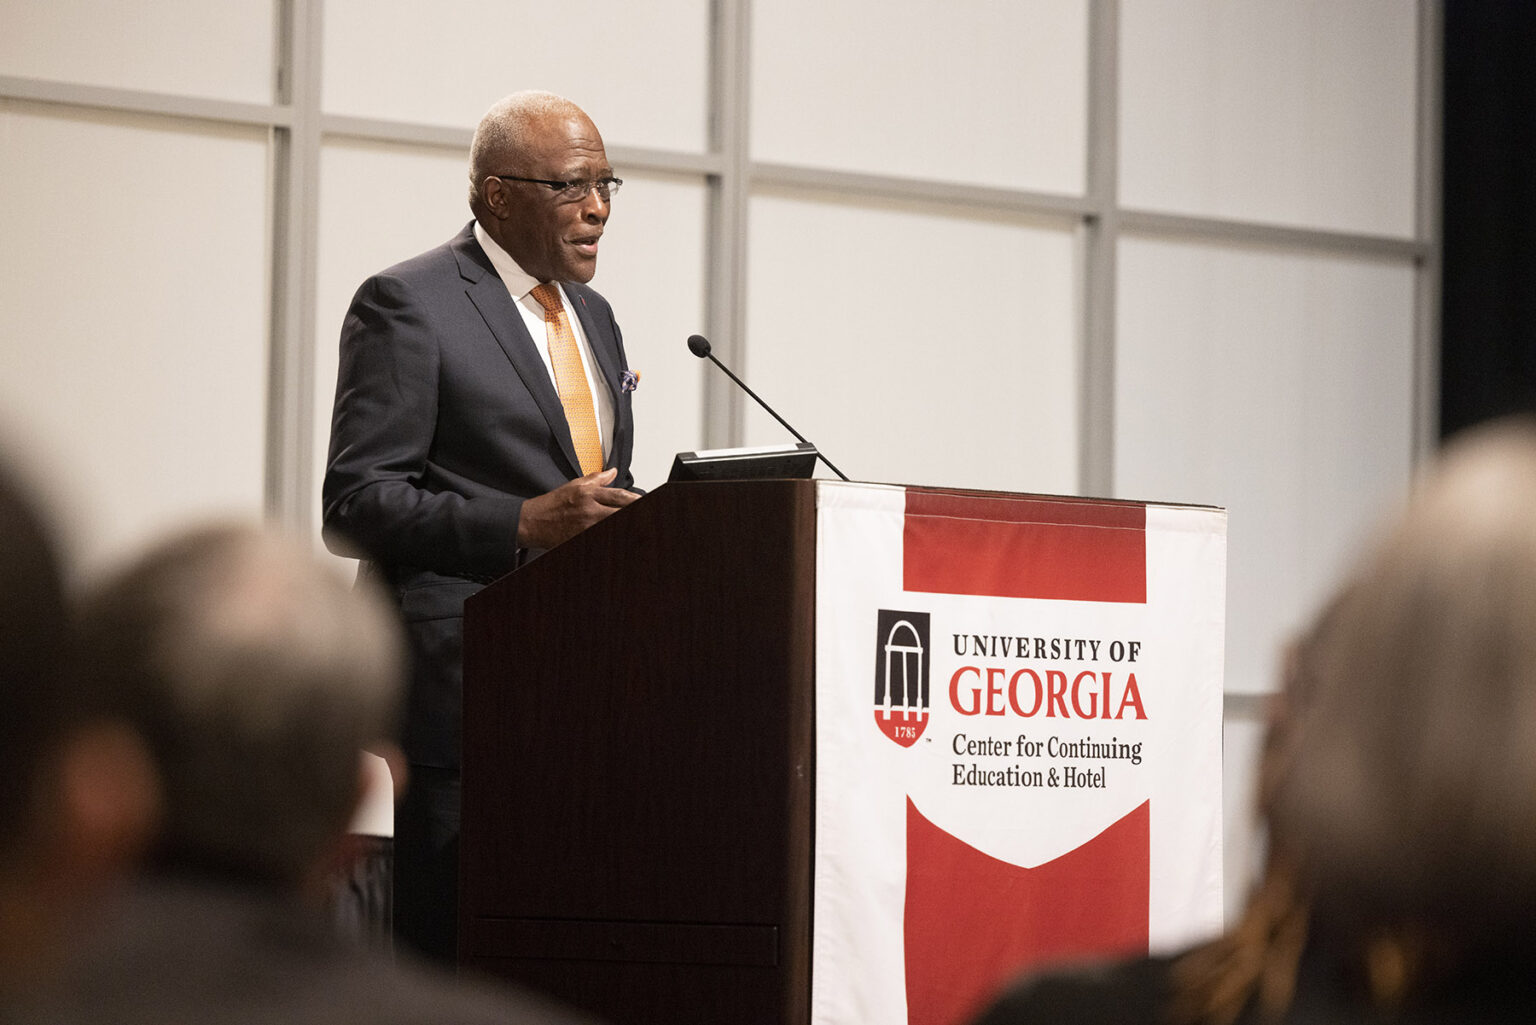 Robert J. Jones, chancellor of the University of Illinois at Urbana-Champaign, delivered the 2022 Mary Frances Early Lecture on Feb. 22. (Photo by Dorothy Kozlowski/UGA)